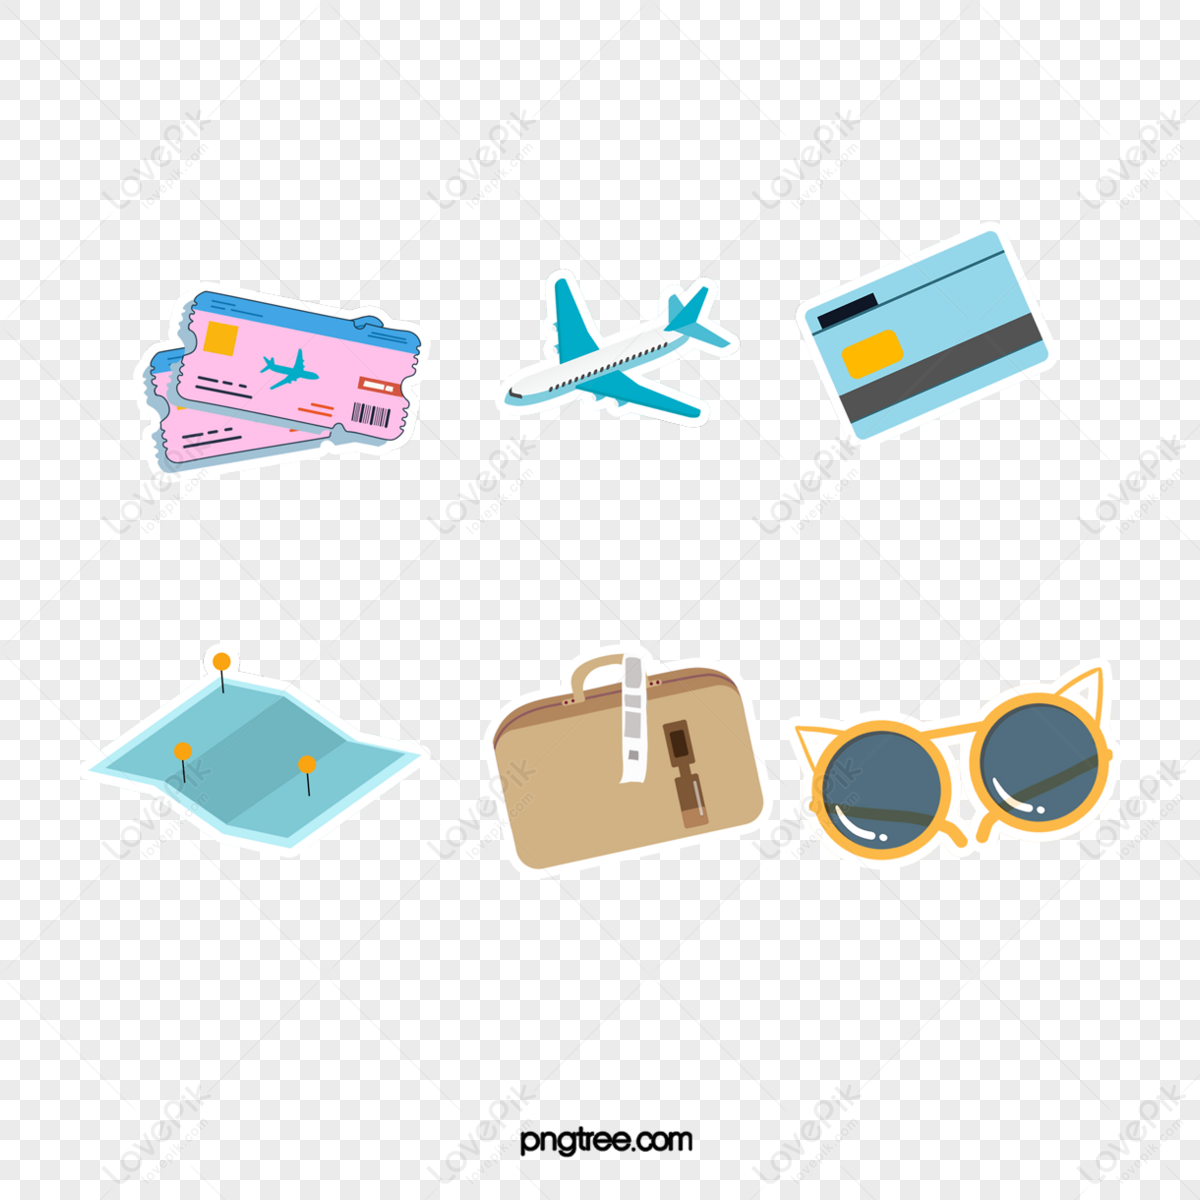 cartoon cute travel icon sticker,travel stickers,travel icons,trunks png hd transparent image